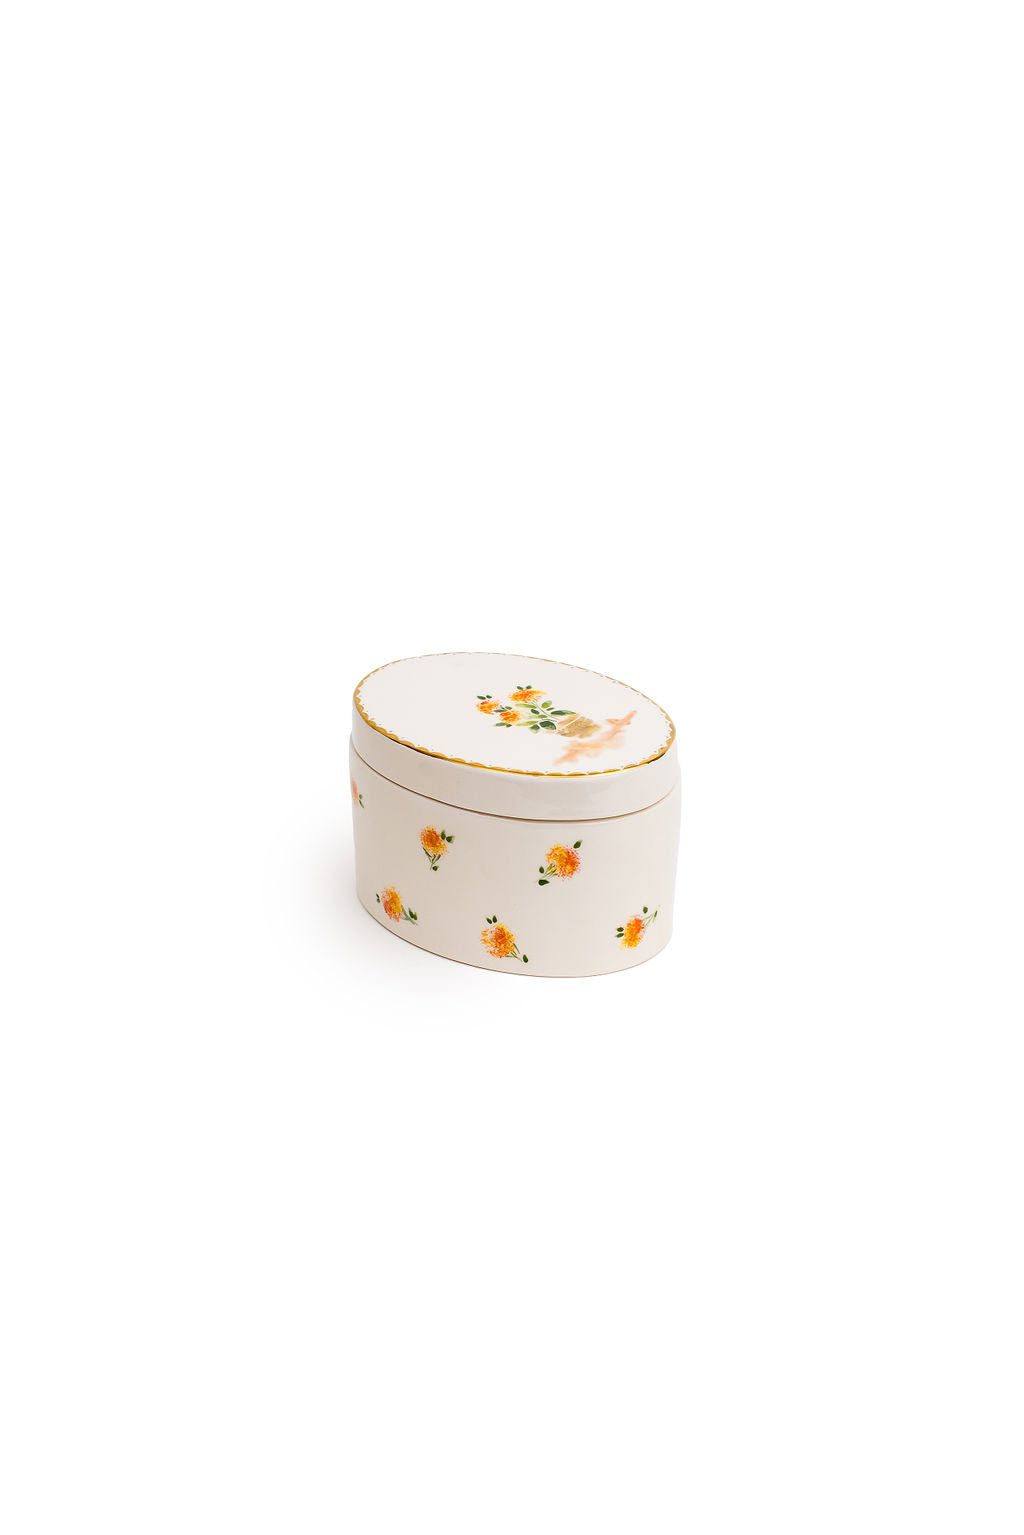 Oval Floral Canister